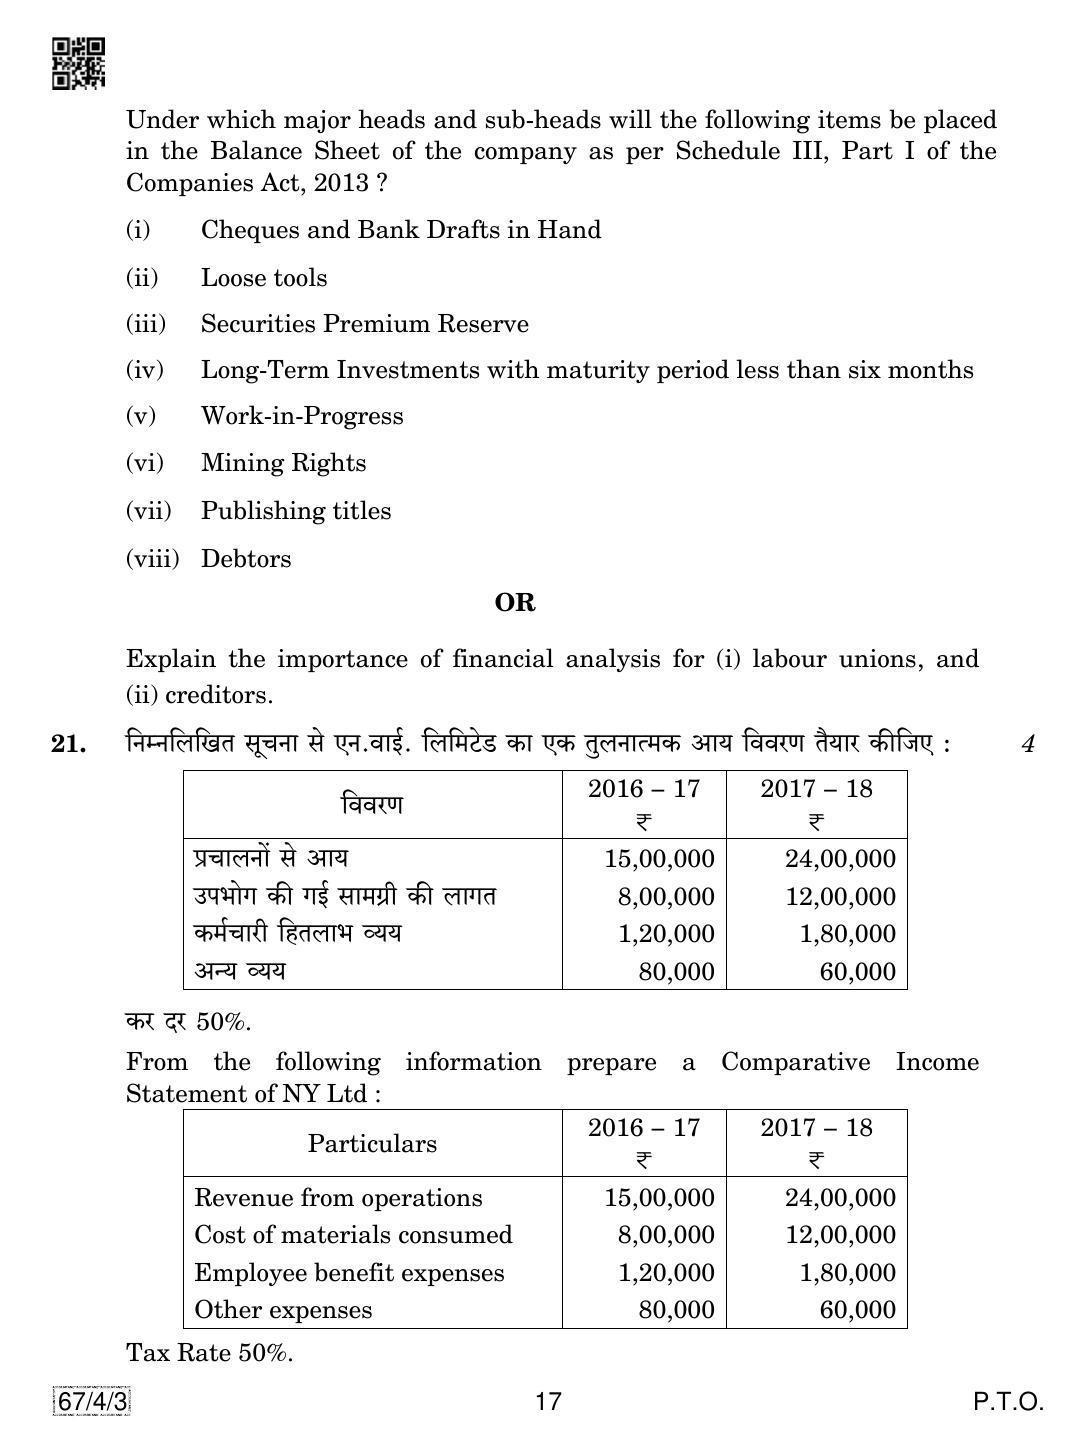 CBSE Class 12 67-4-3 Accountancy 2019 Question Paper - Page 17